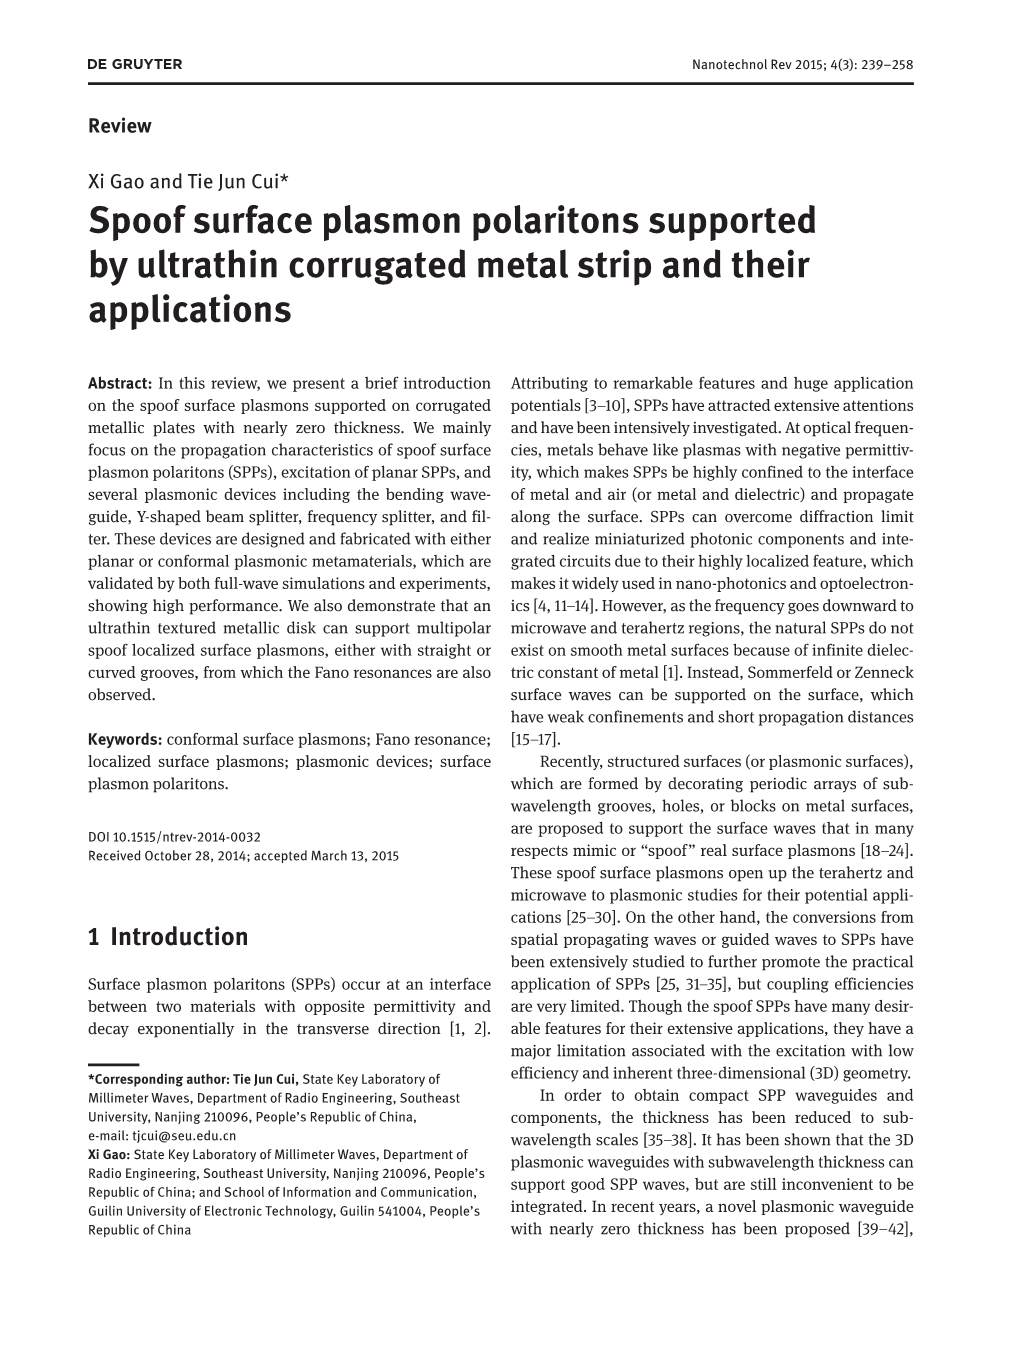 Spoof Surface Plasmon Polaritons Supported by Ultrathin Corrugated Metal Strip and Their Applications